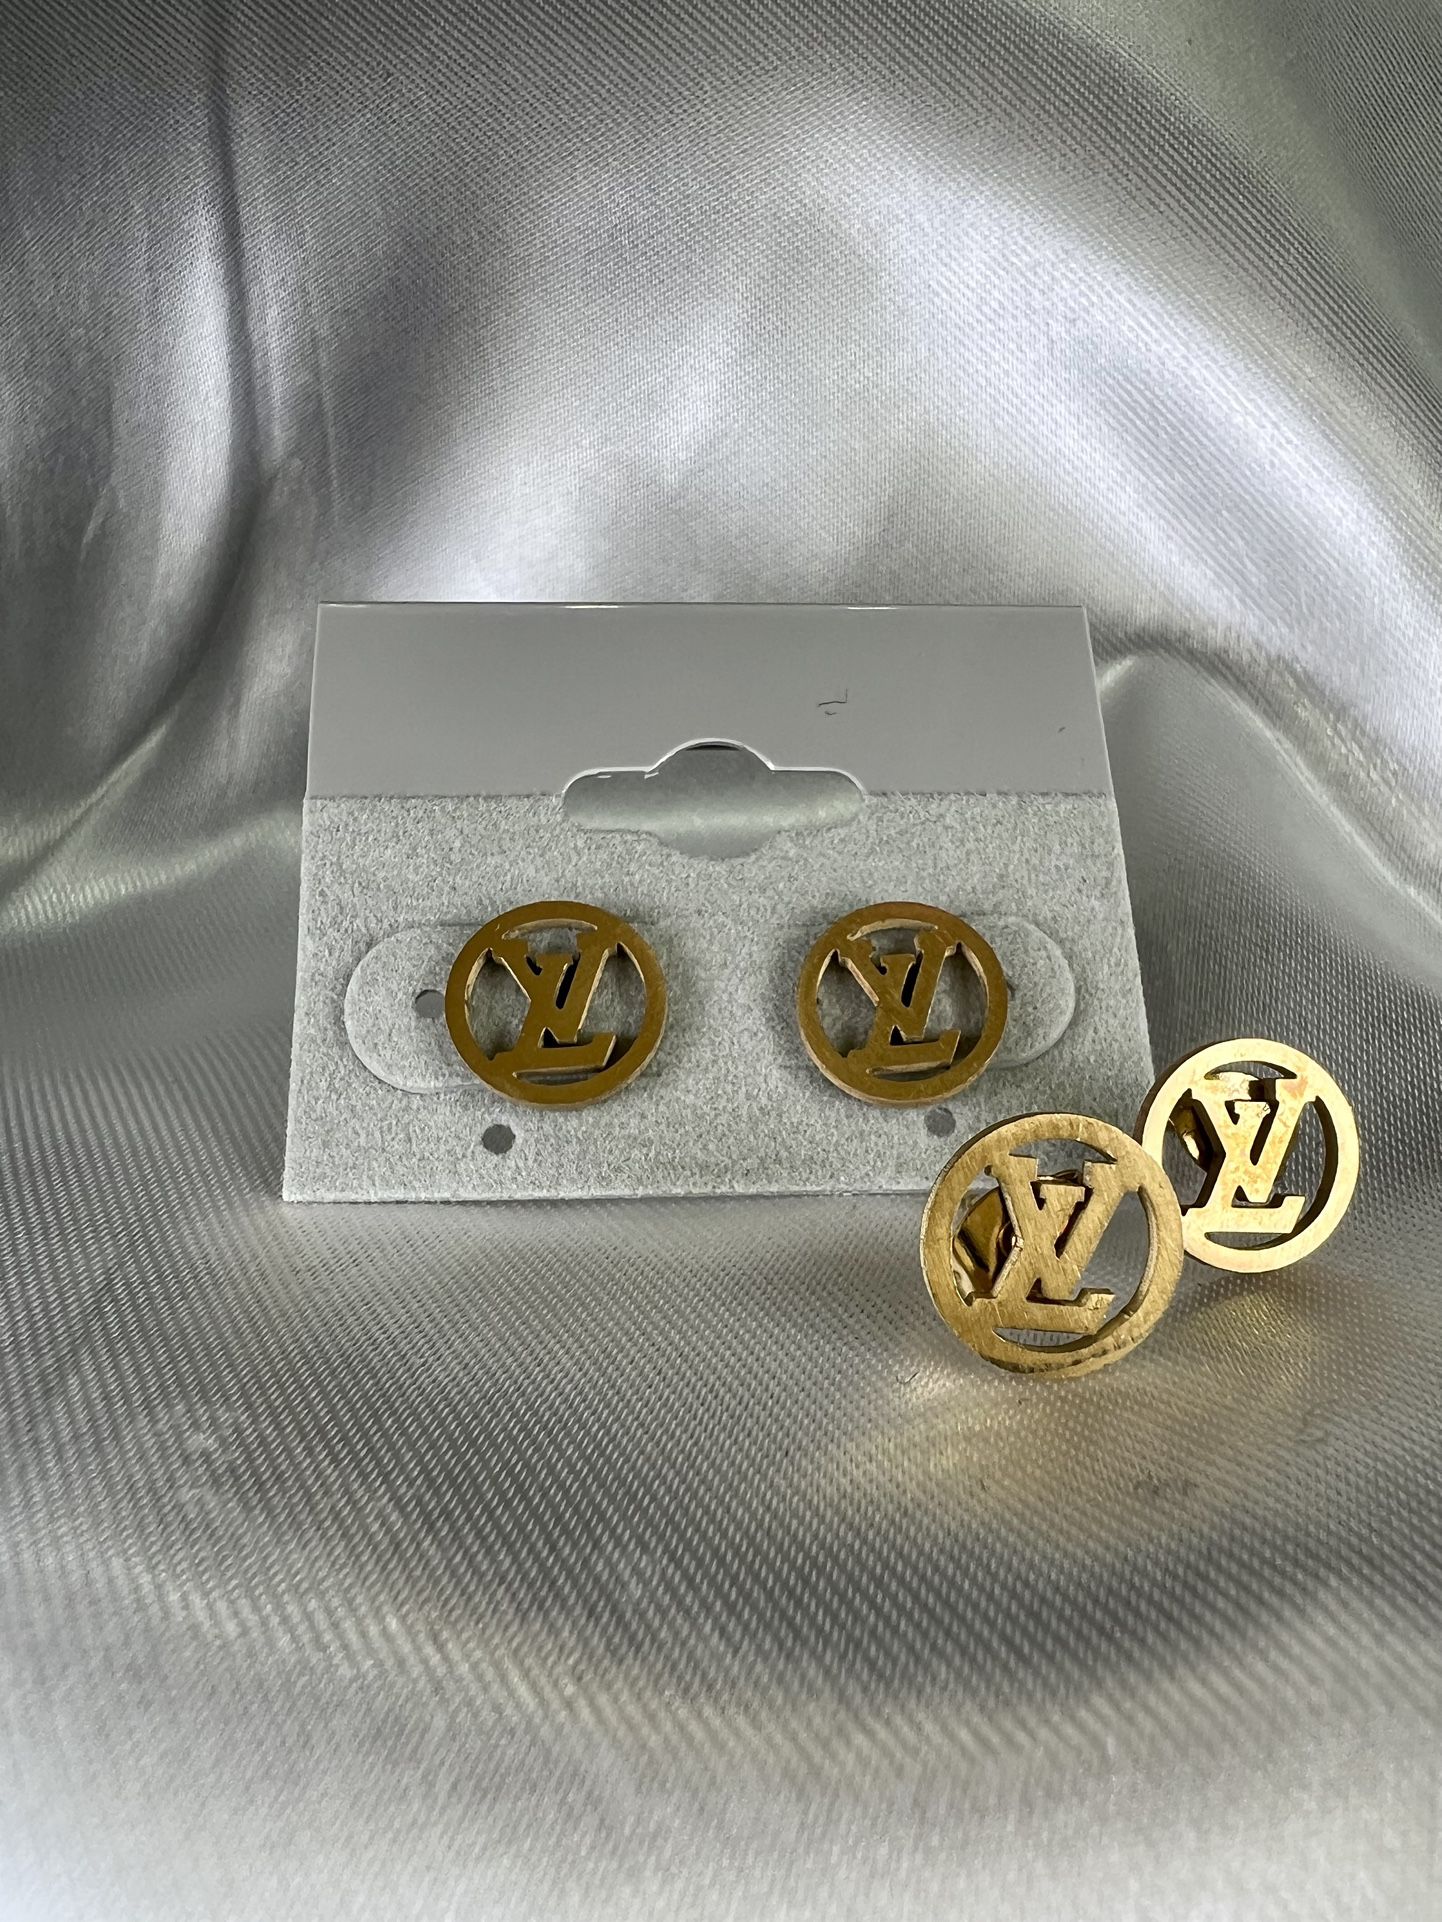 Earrings LV & CC Small for Sale in Homestead, FL - OfferUp